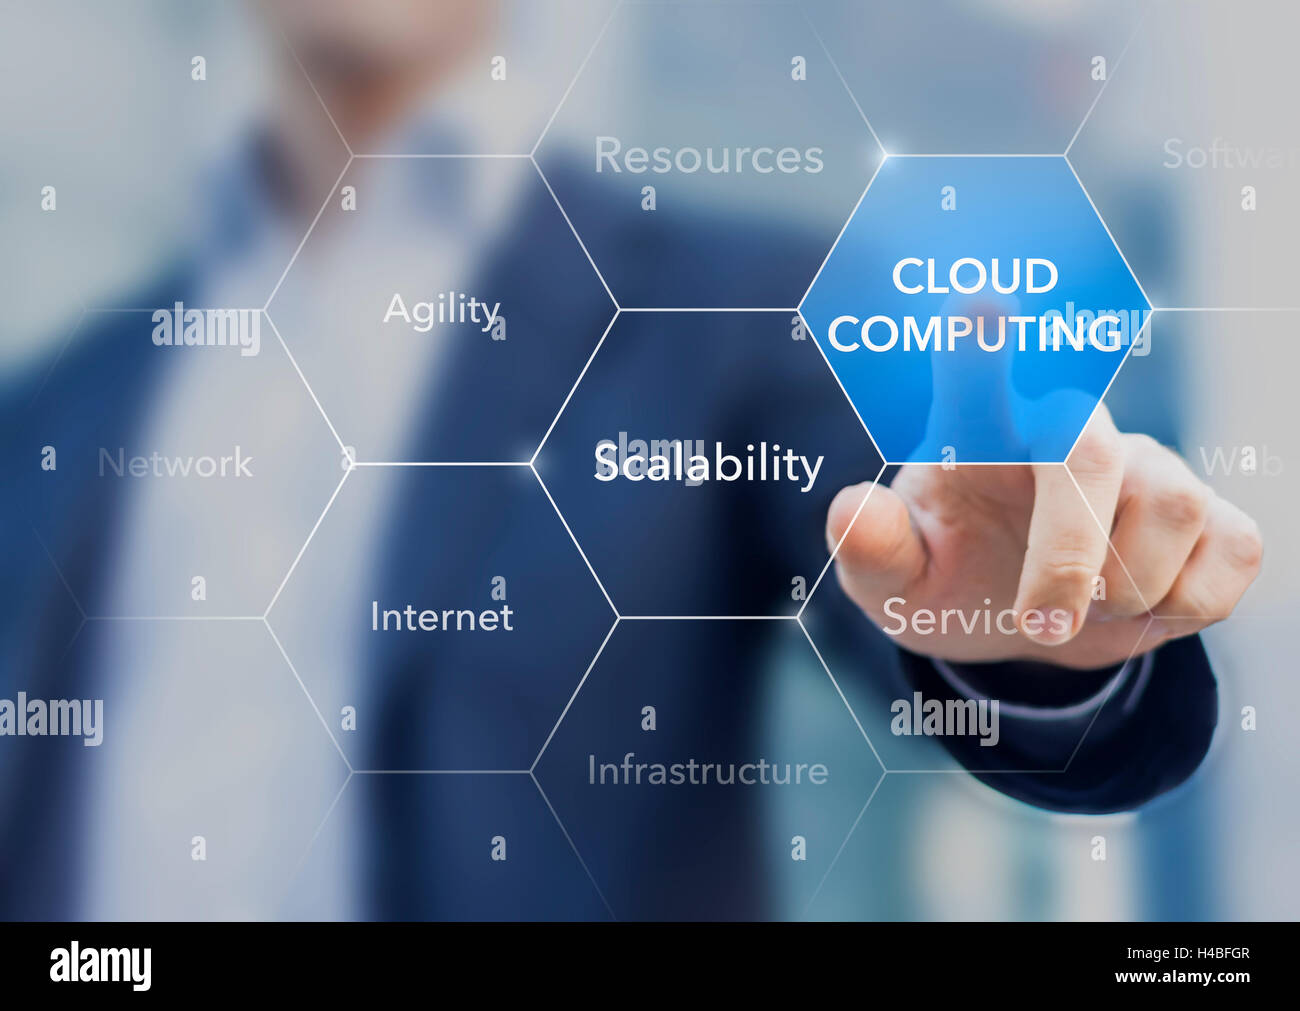 Consultant promoting cloud computing resources and services Stock Photo